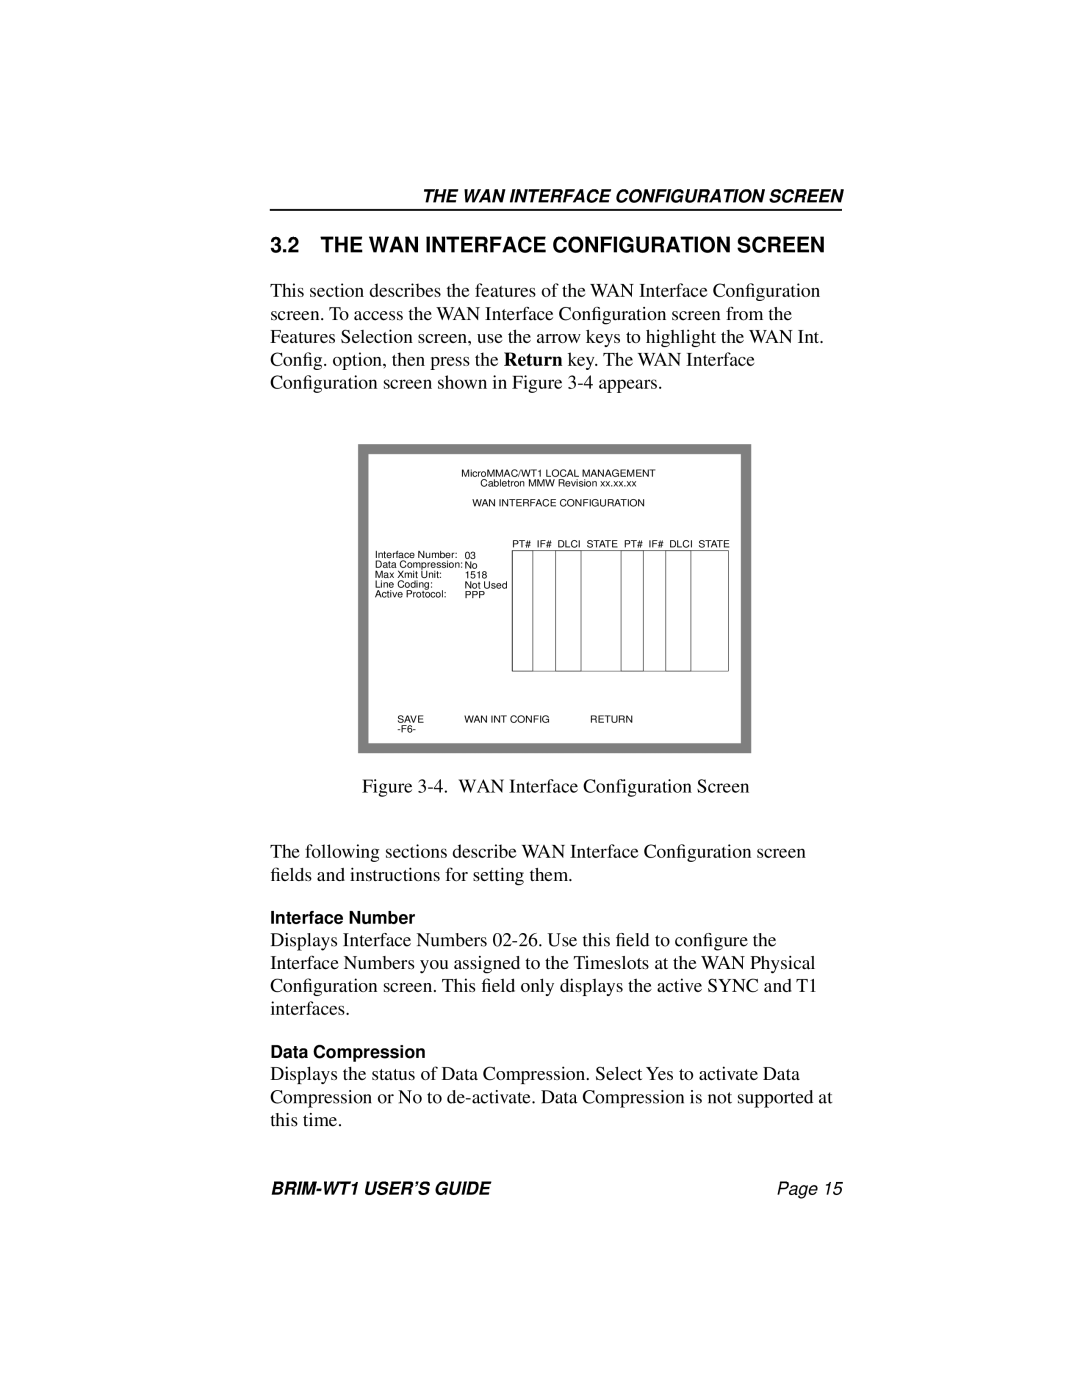 Cabletron Systems BRIM-WT1 manual The Wan Interface Configuration Screen 